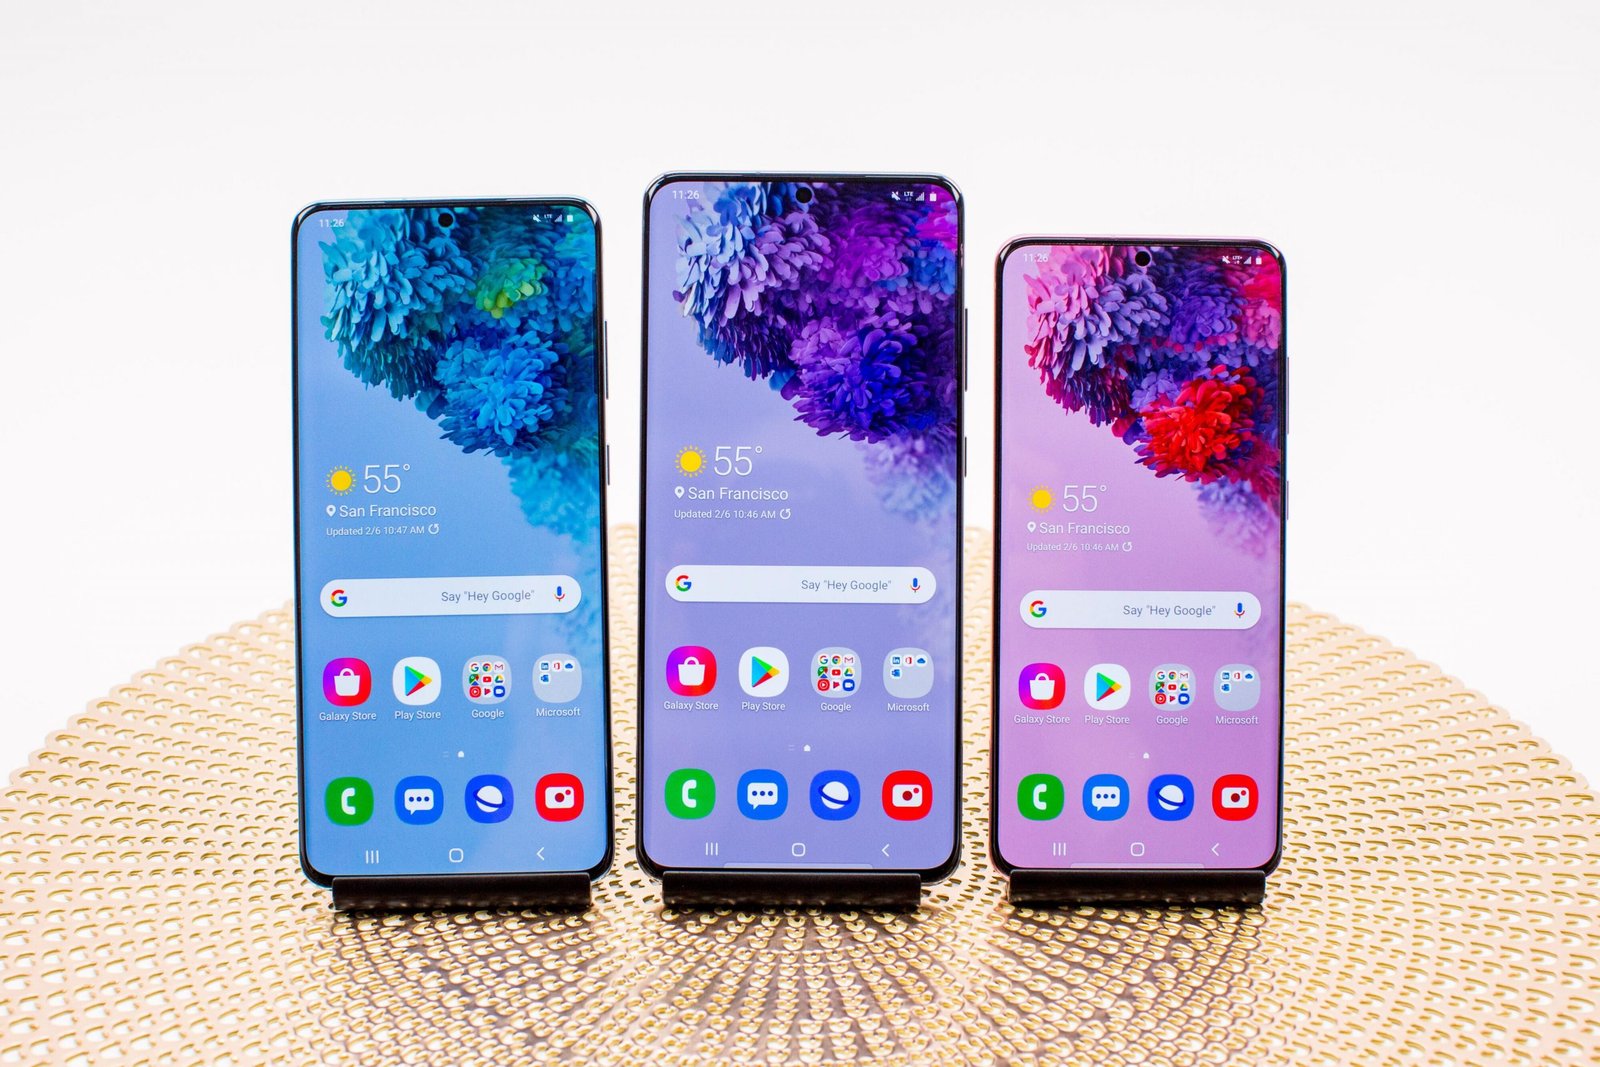 Galaxy S20, S20 Plus and S20 Ultra specs vs. Galaxy S10 and S10 Plus: What’s new and what’s different